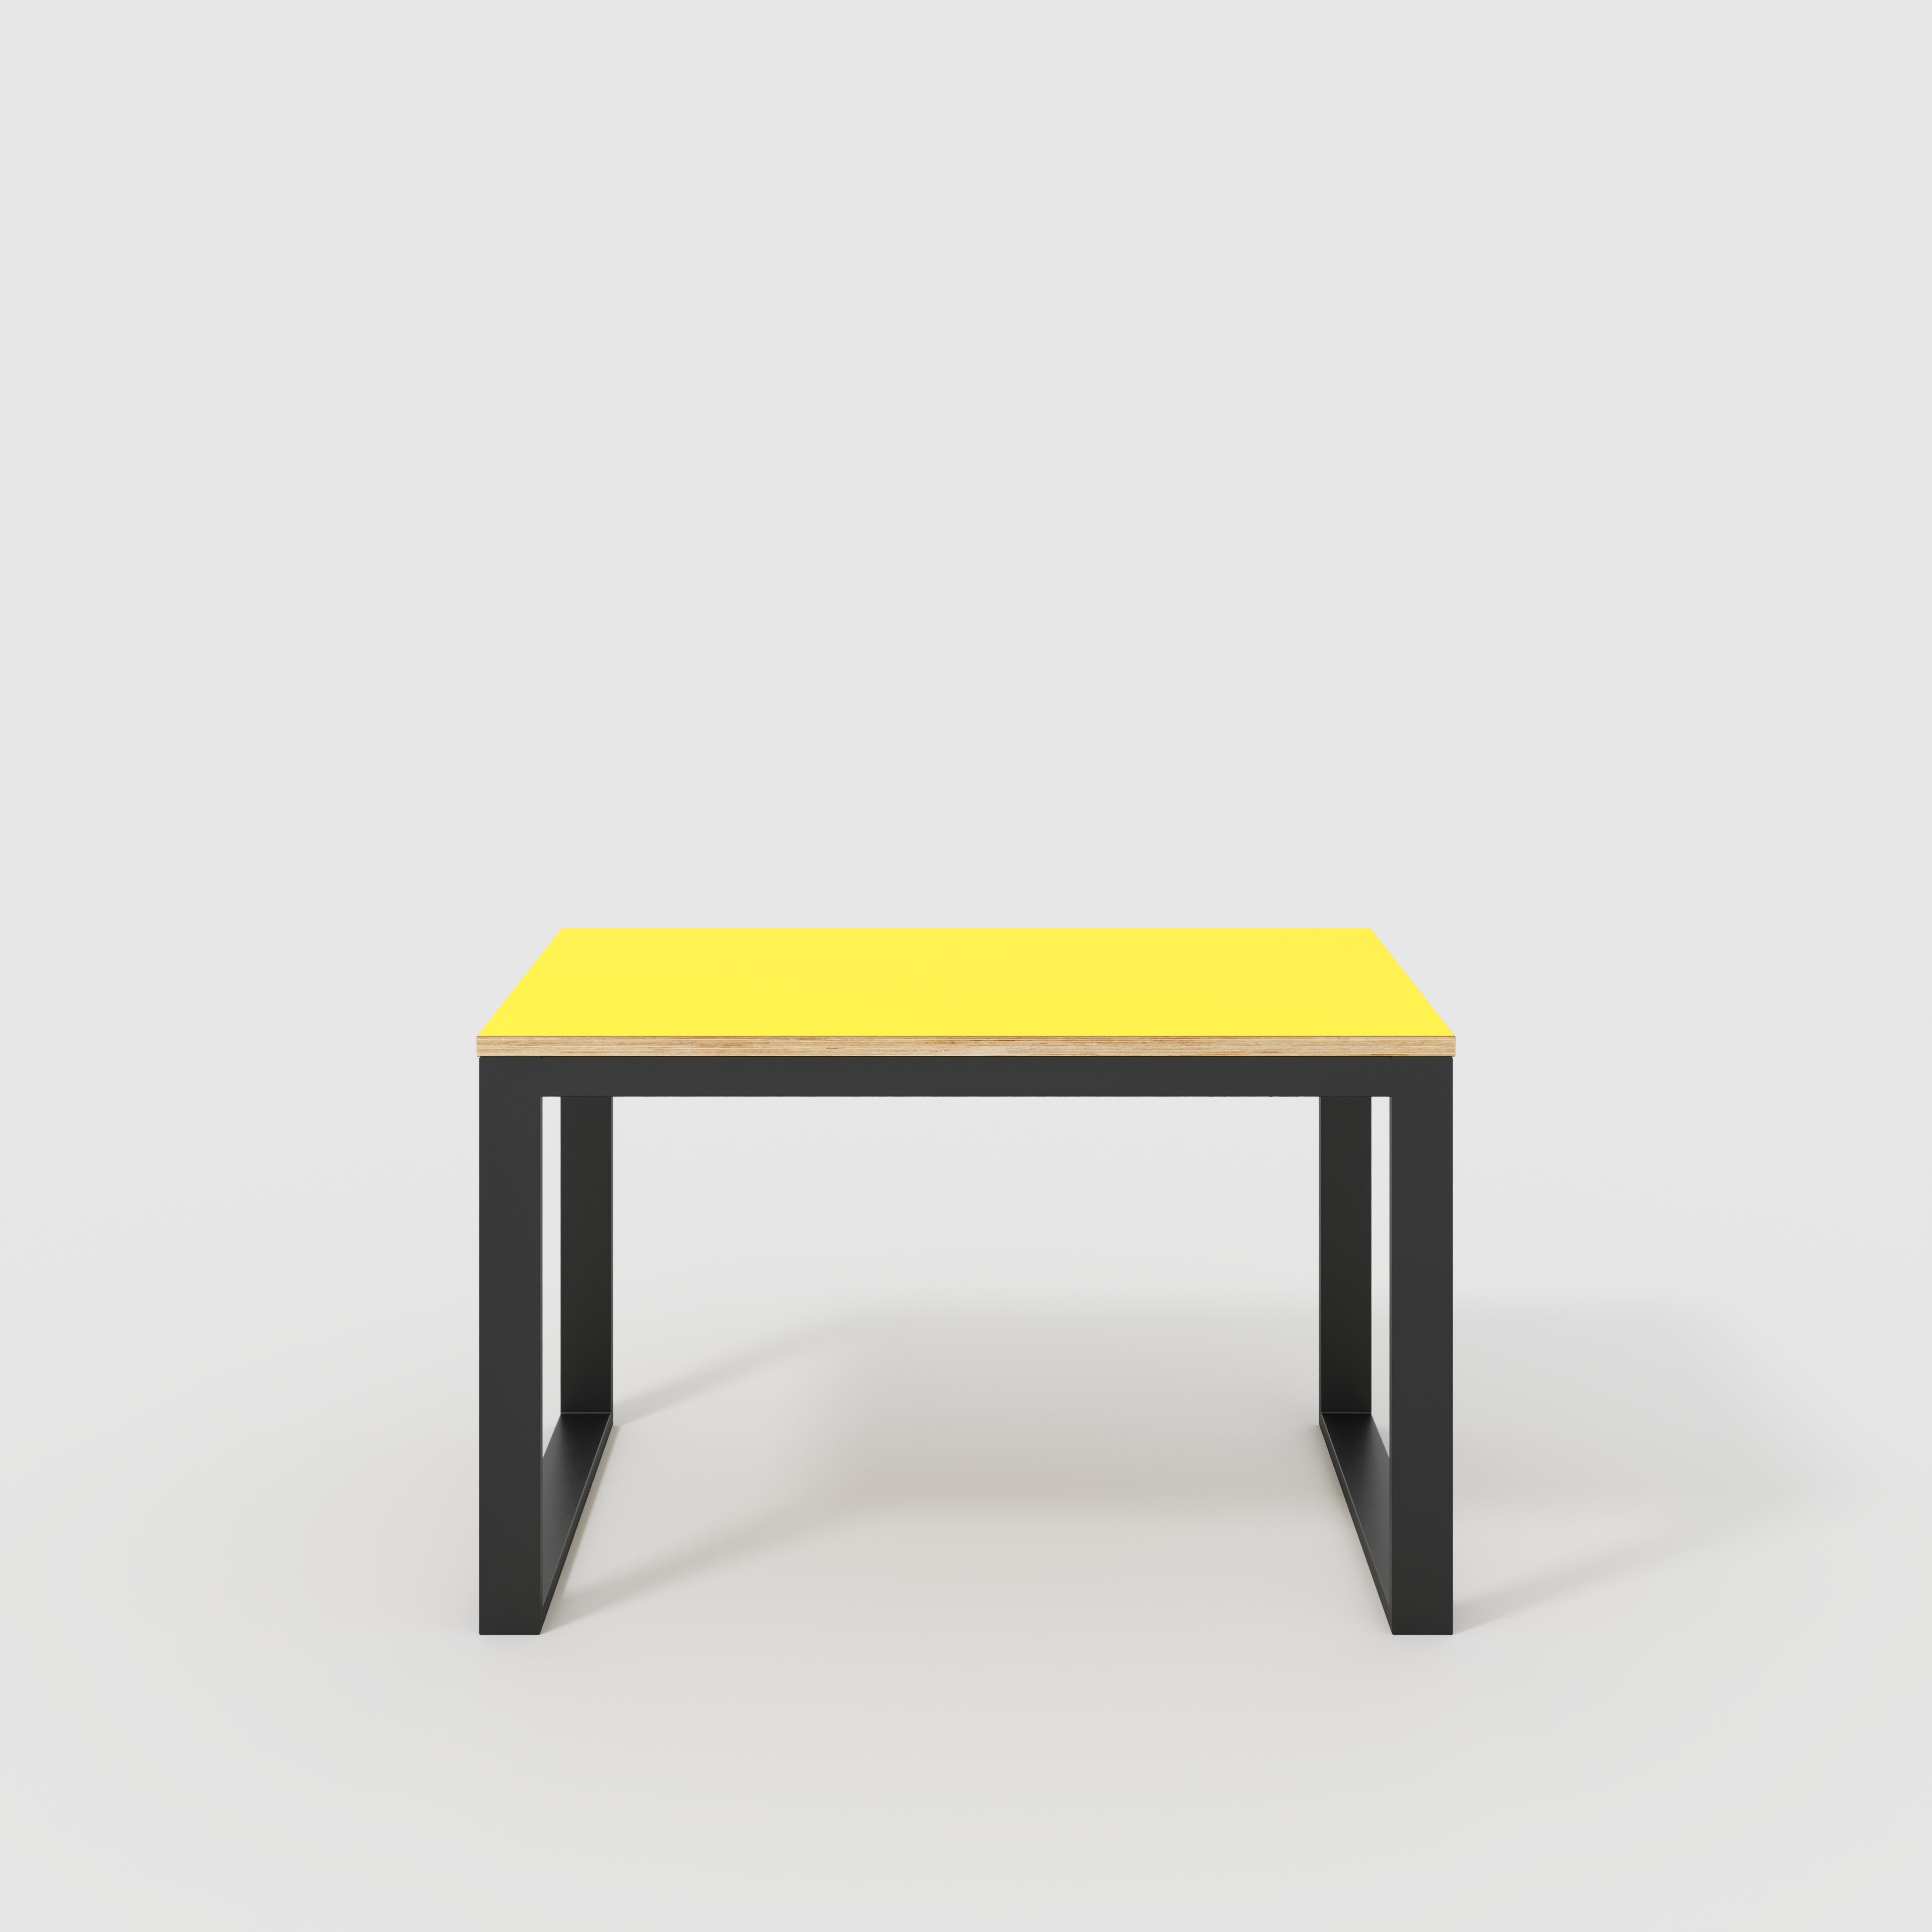 Table with Black Industrial Frame - Formica Chrome Yellow - 1200(w) x 745(d) x 735(h)